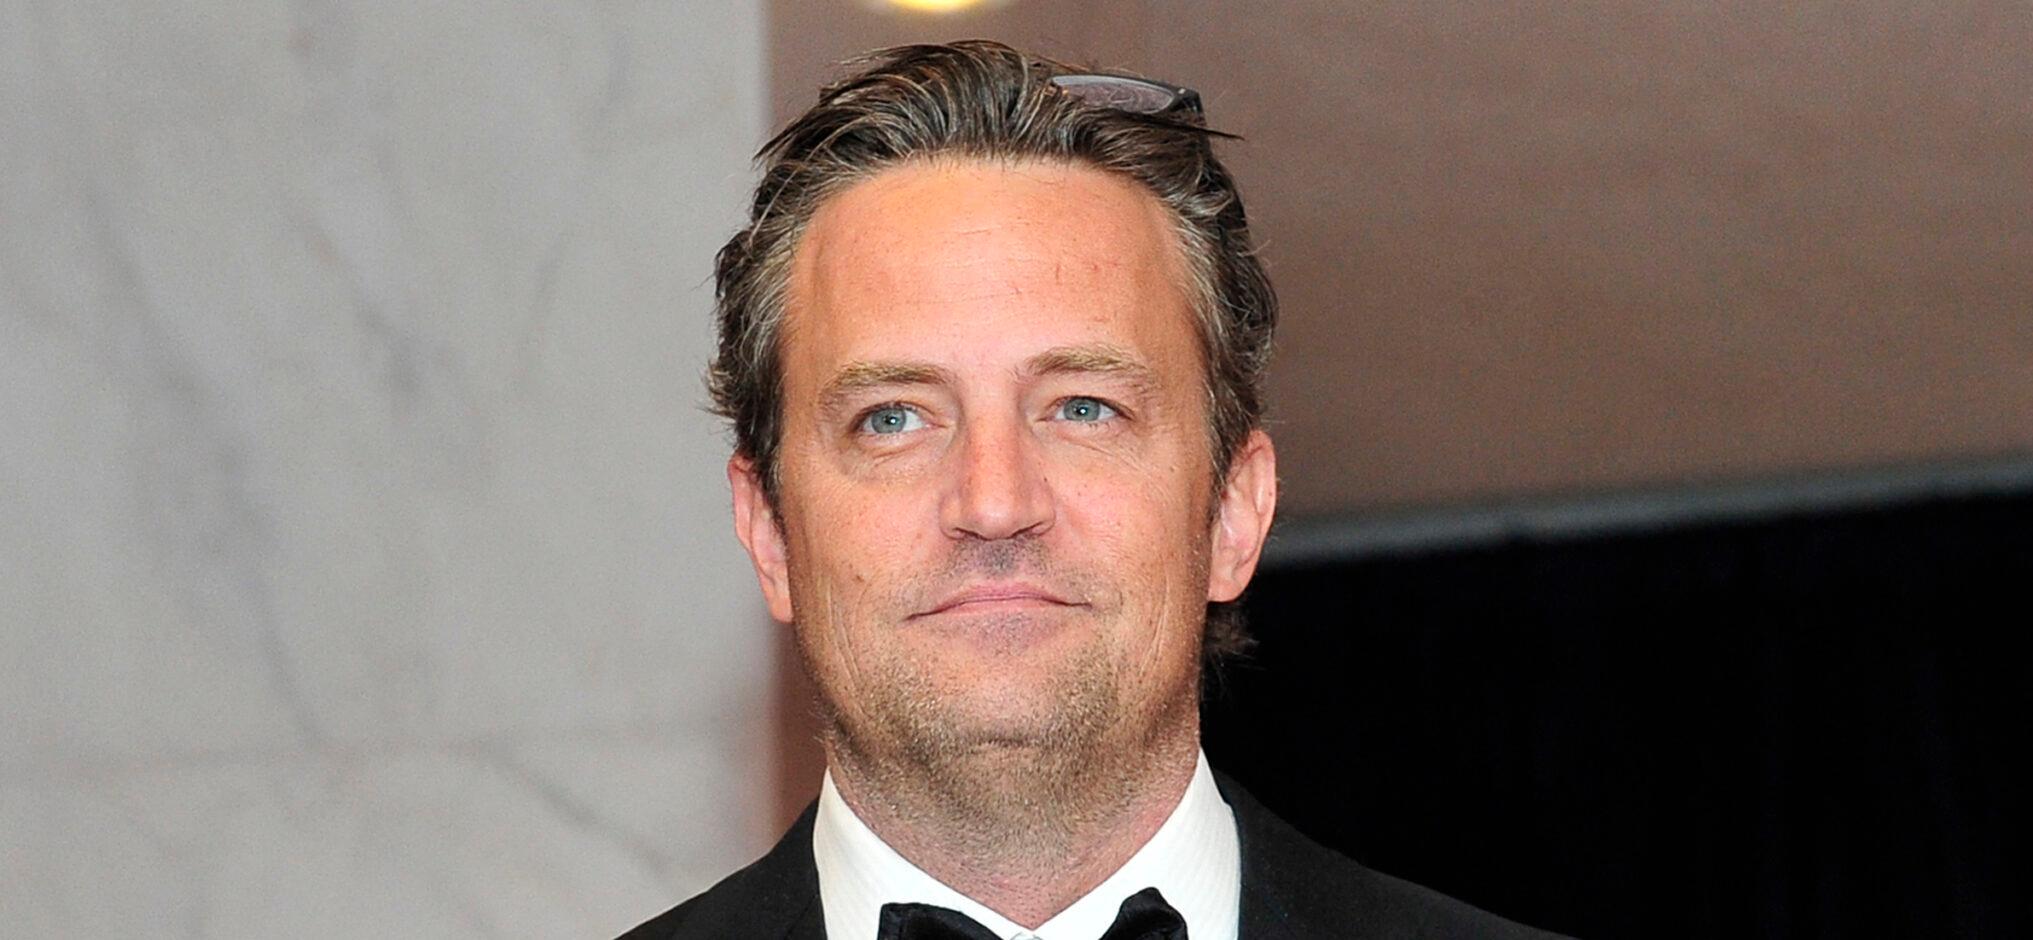 Matthew Perry’s Fans Still Commenting On His Social Media 4 Months After Death